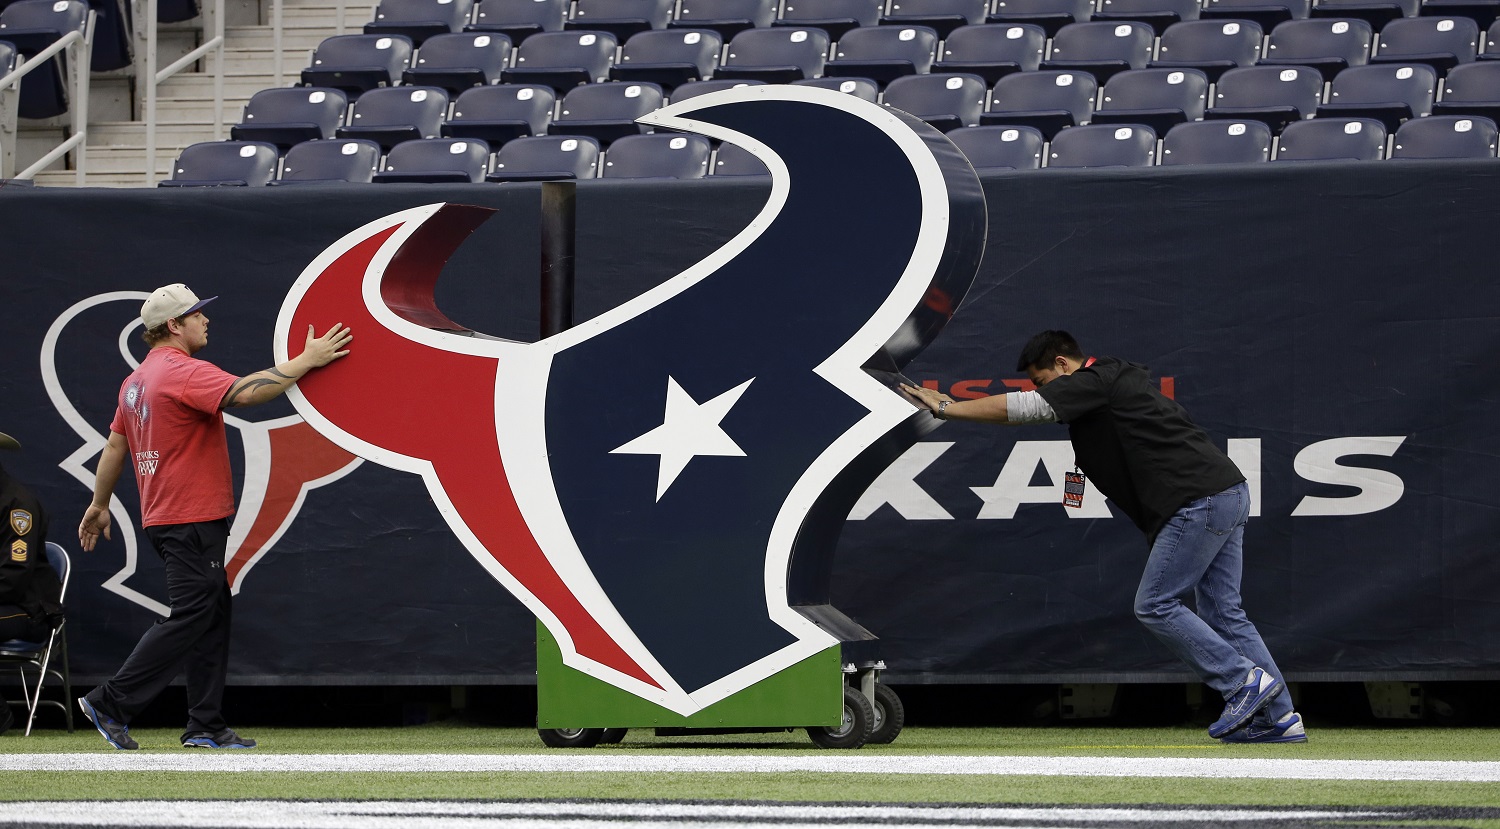 Houston Texans logos are moves at NRG Stadium prior to an NFL football game between the Houston Texans and New York Jets, Sunday, Nov. 22, 2015, in Houston. (AP Photo/David J. Phillip)